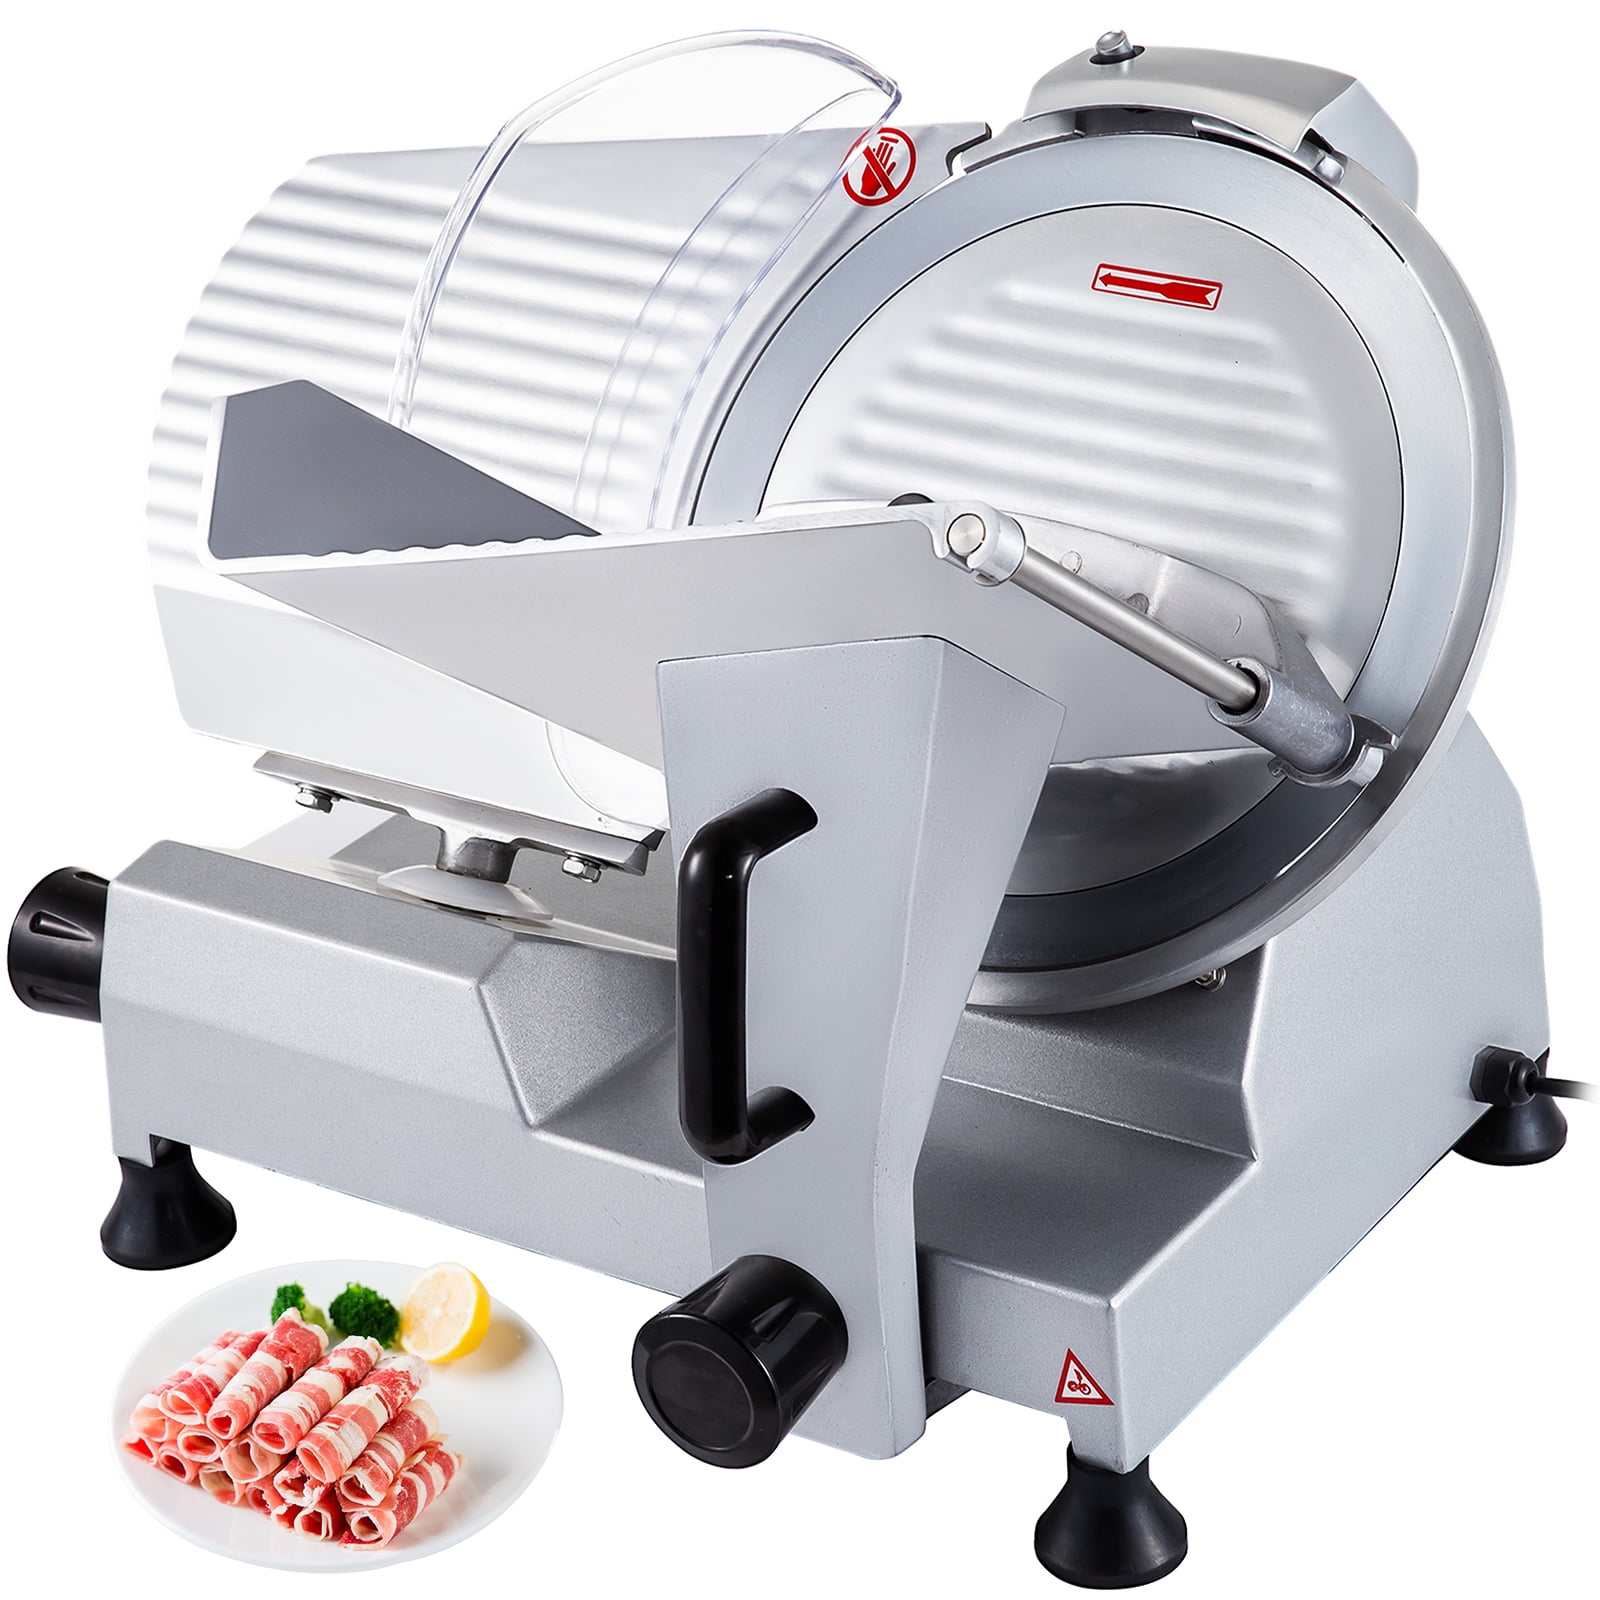  Yescom 12 Commercial Meat Slicer Stainless Steel Blade Deli  Food Cheese Electric Slicer Veggies Cutter Restaurant: Electric Food Slicers:  Home & Kitchen